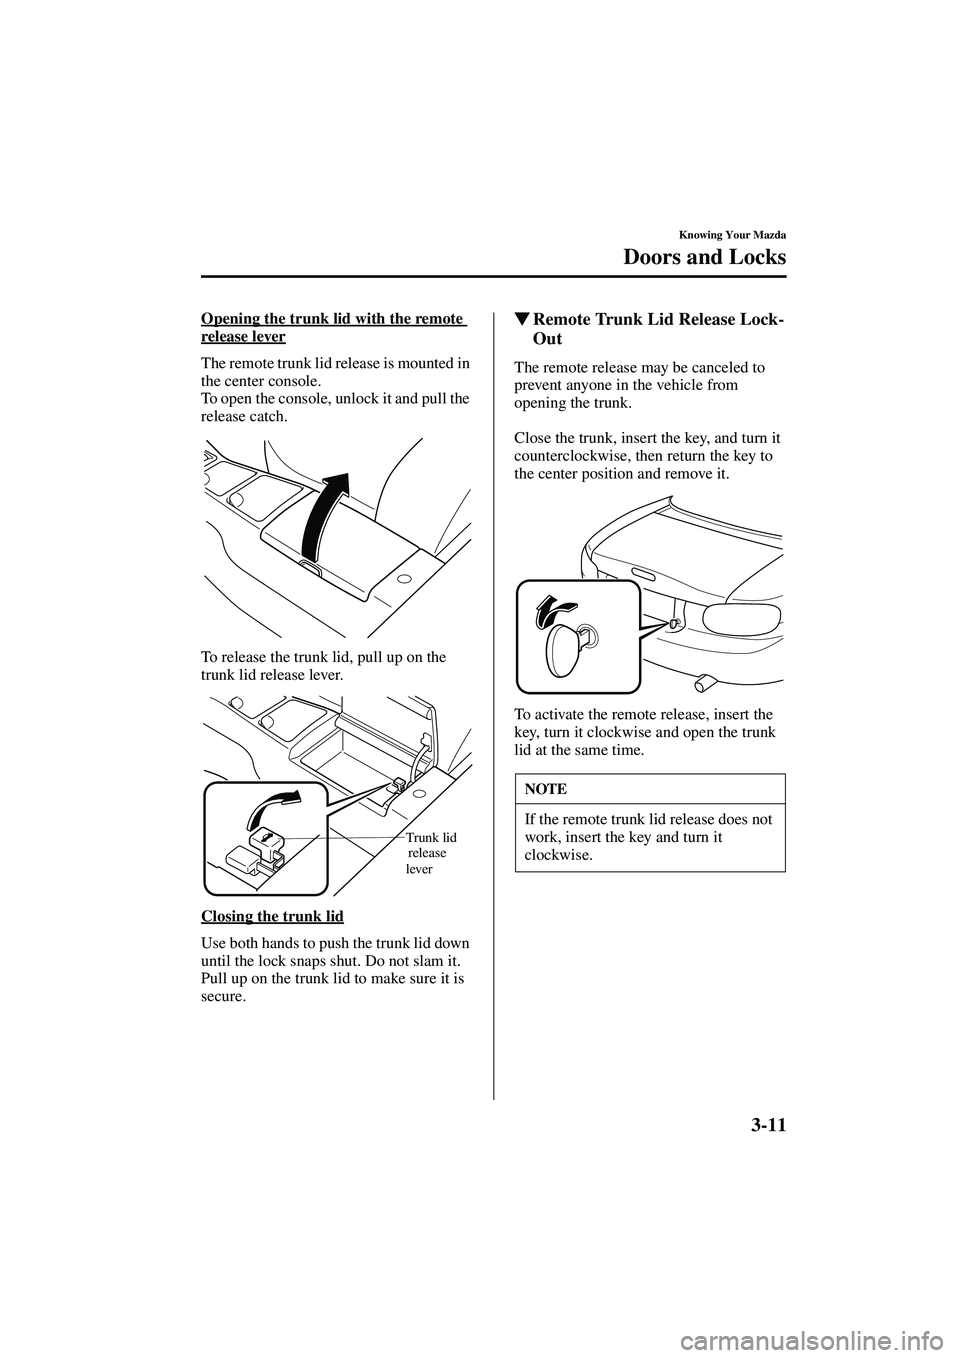 MAZDA MODEL MX-5 MIATA 2004  Owners Manual 3-11
Knowing Your Mazda
Doors and Locks
Form No. 8S15-EA-03G
Opening the trunk lid with the remote 
release lever
The remote trunk lid release is mounted in 
the center console.
To open the console, u